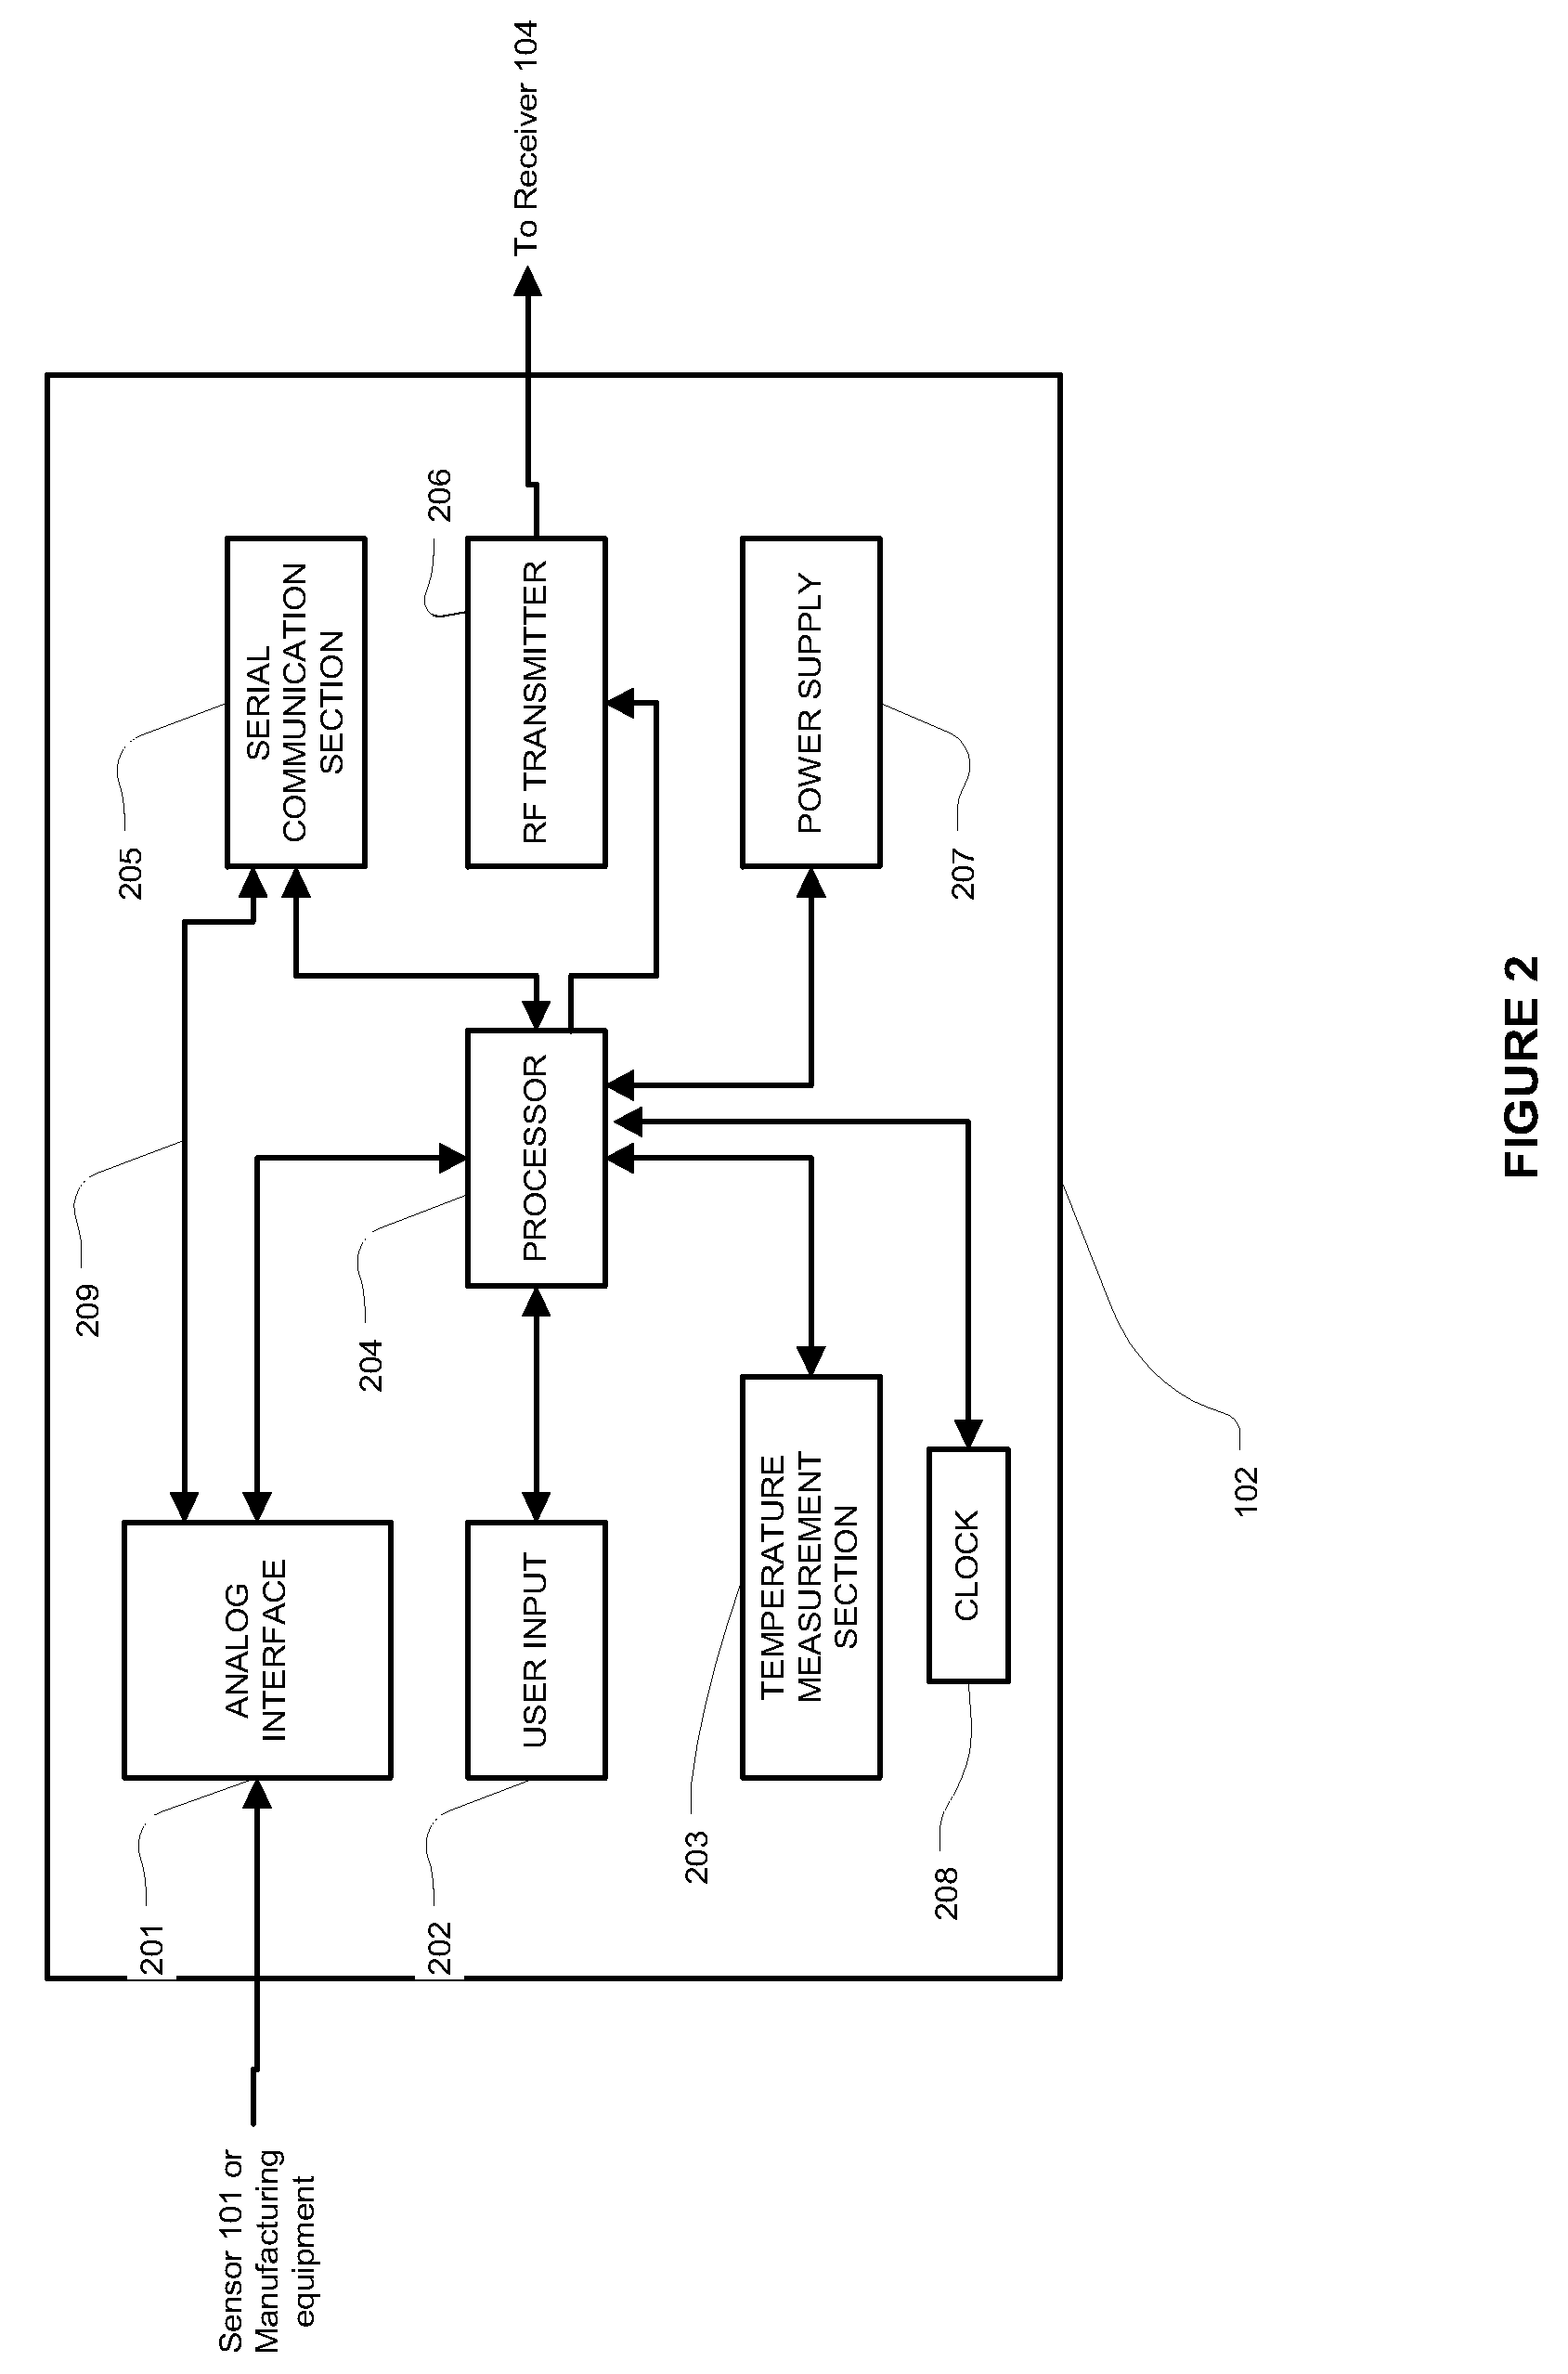 Method and system for dynamically updating calibration parameters for an analyte sensor